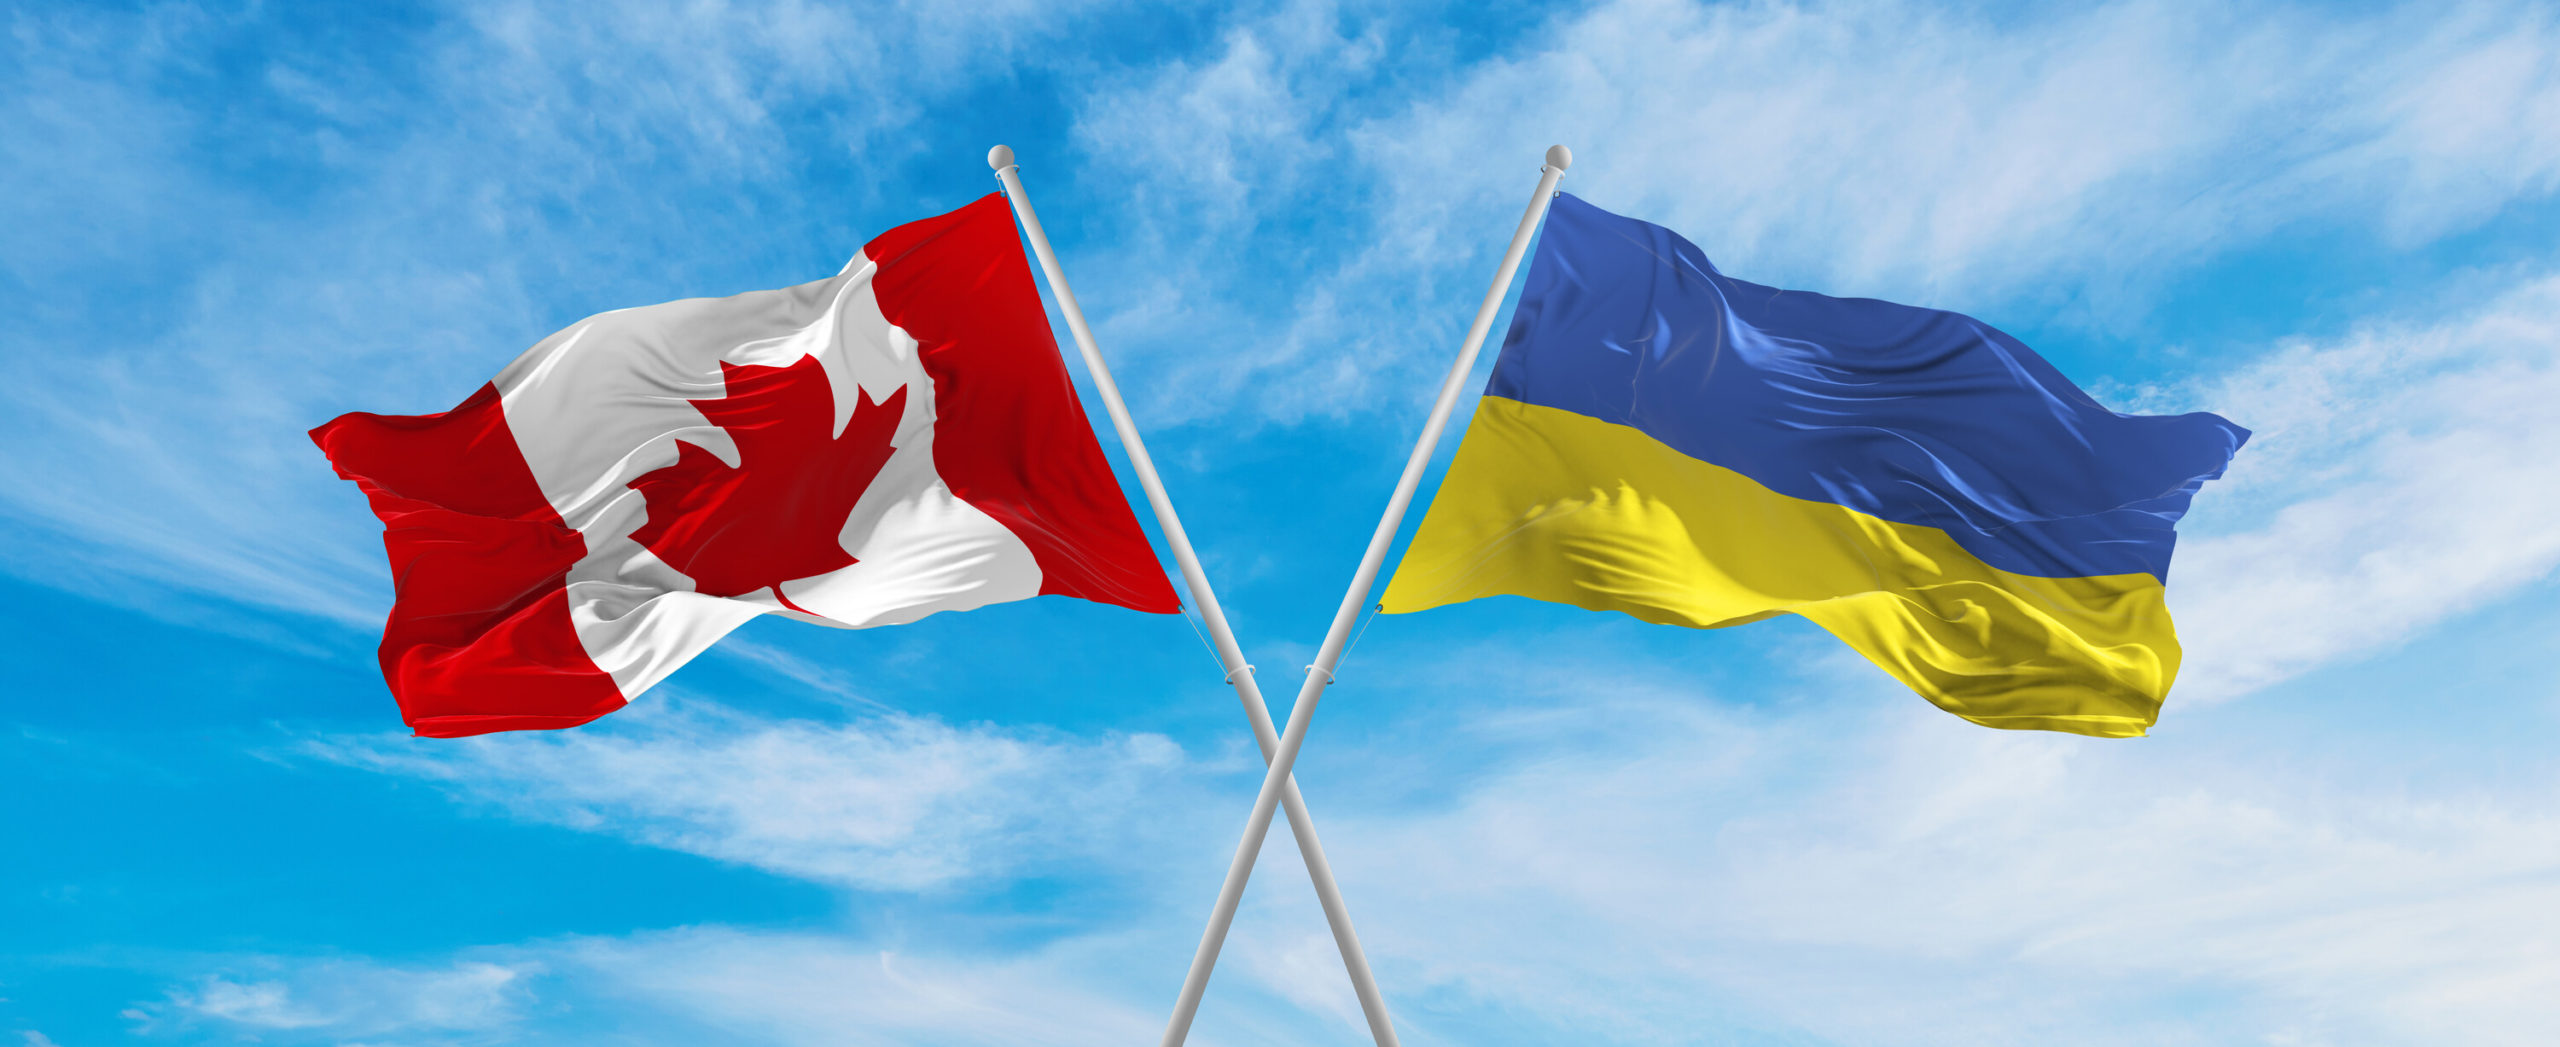 Canadian Industry for Ukraine donation portal created